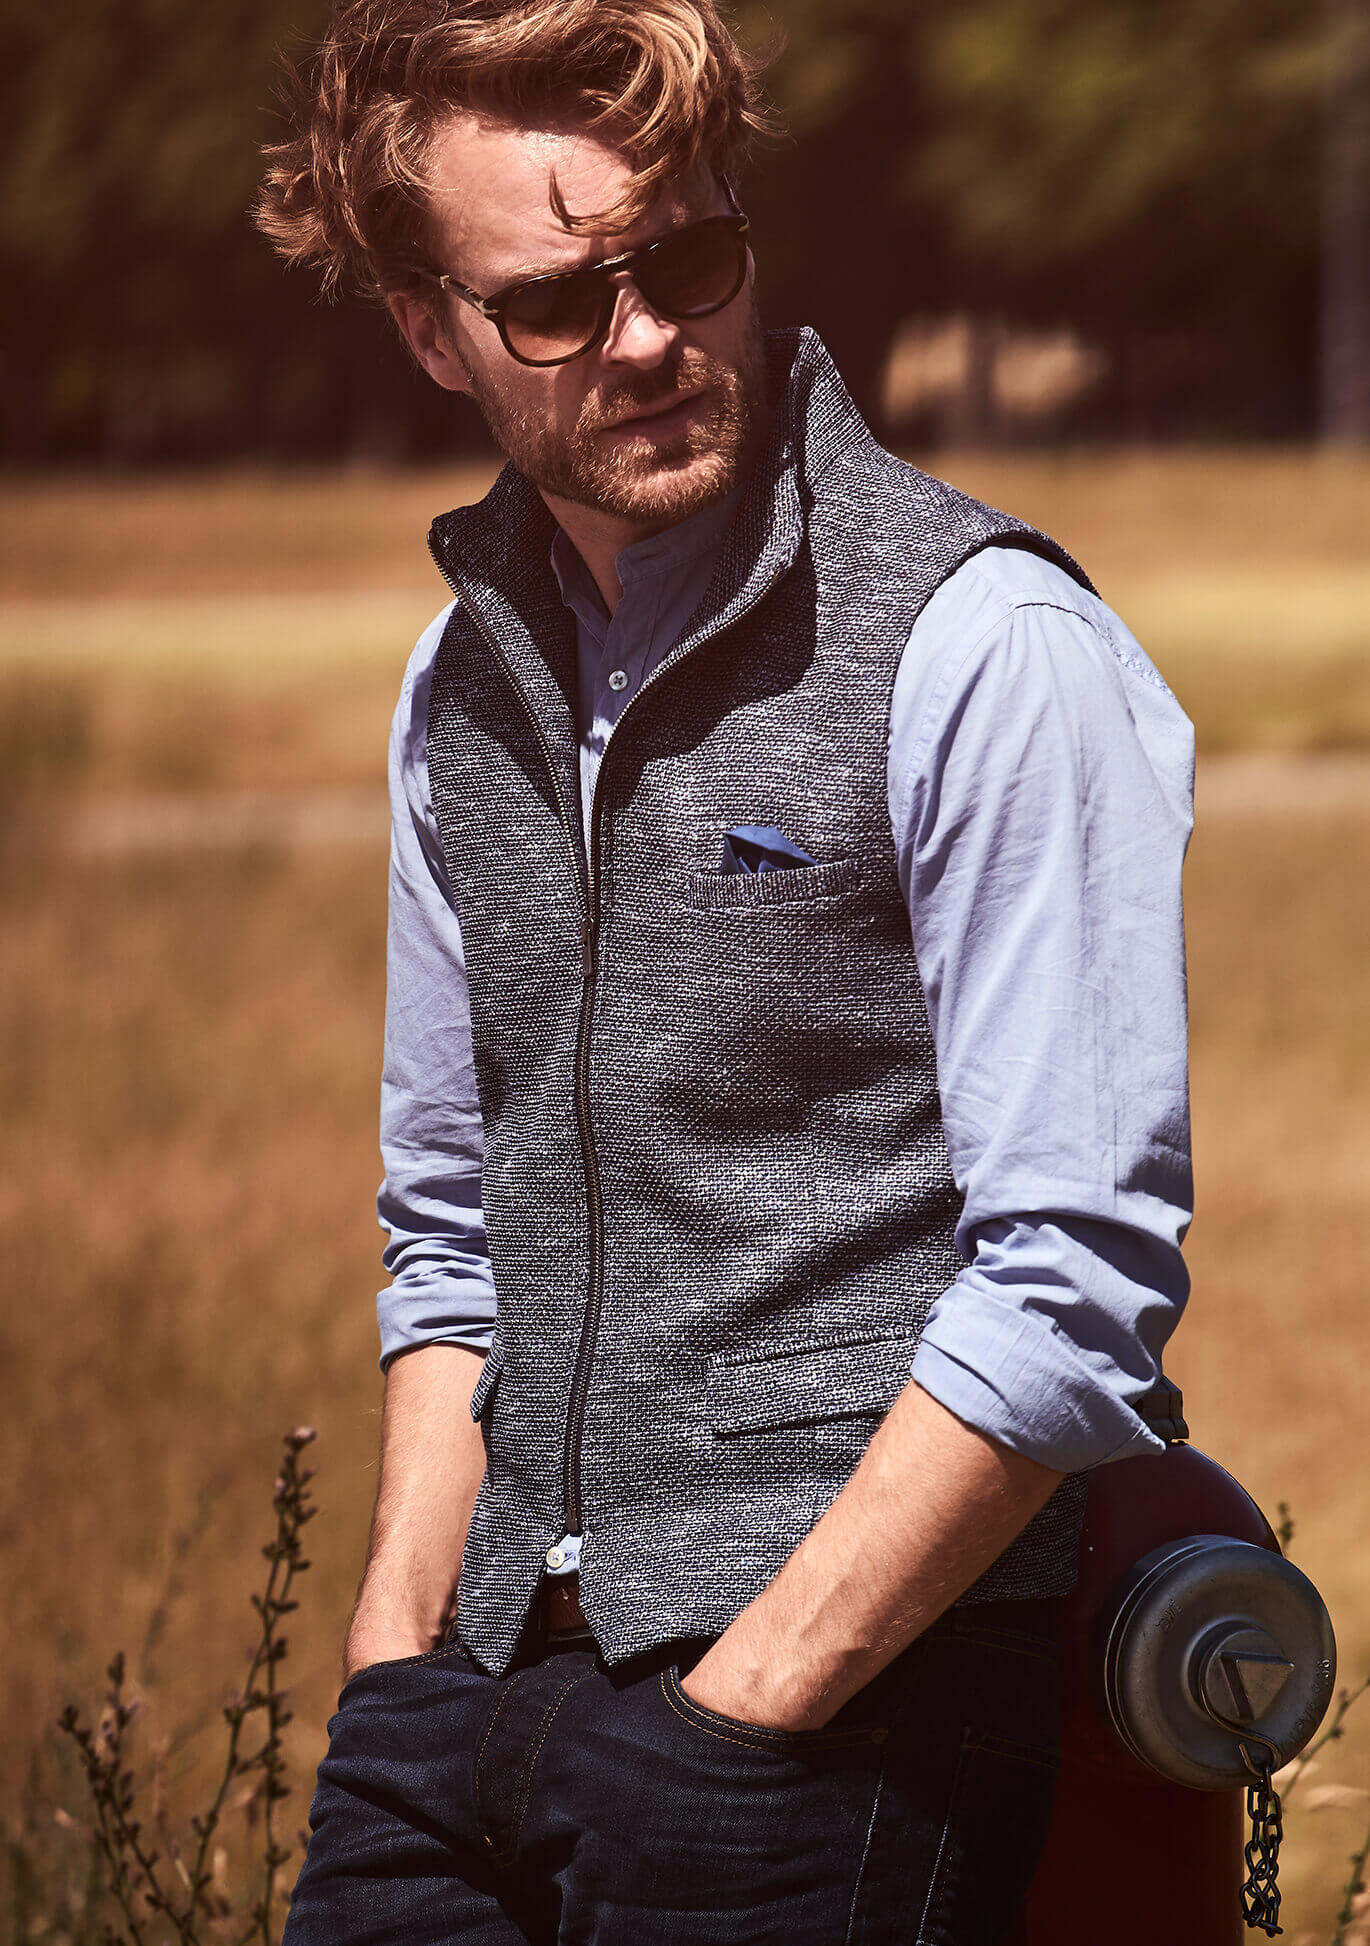 Fashion: The Stylish Gent's Guide To Sweater Vests